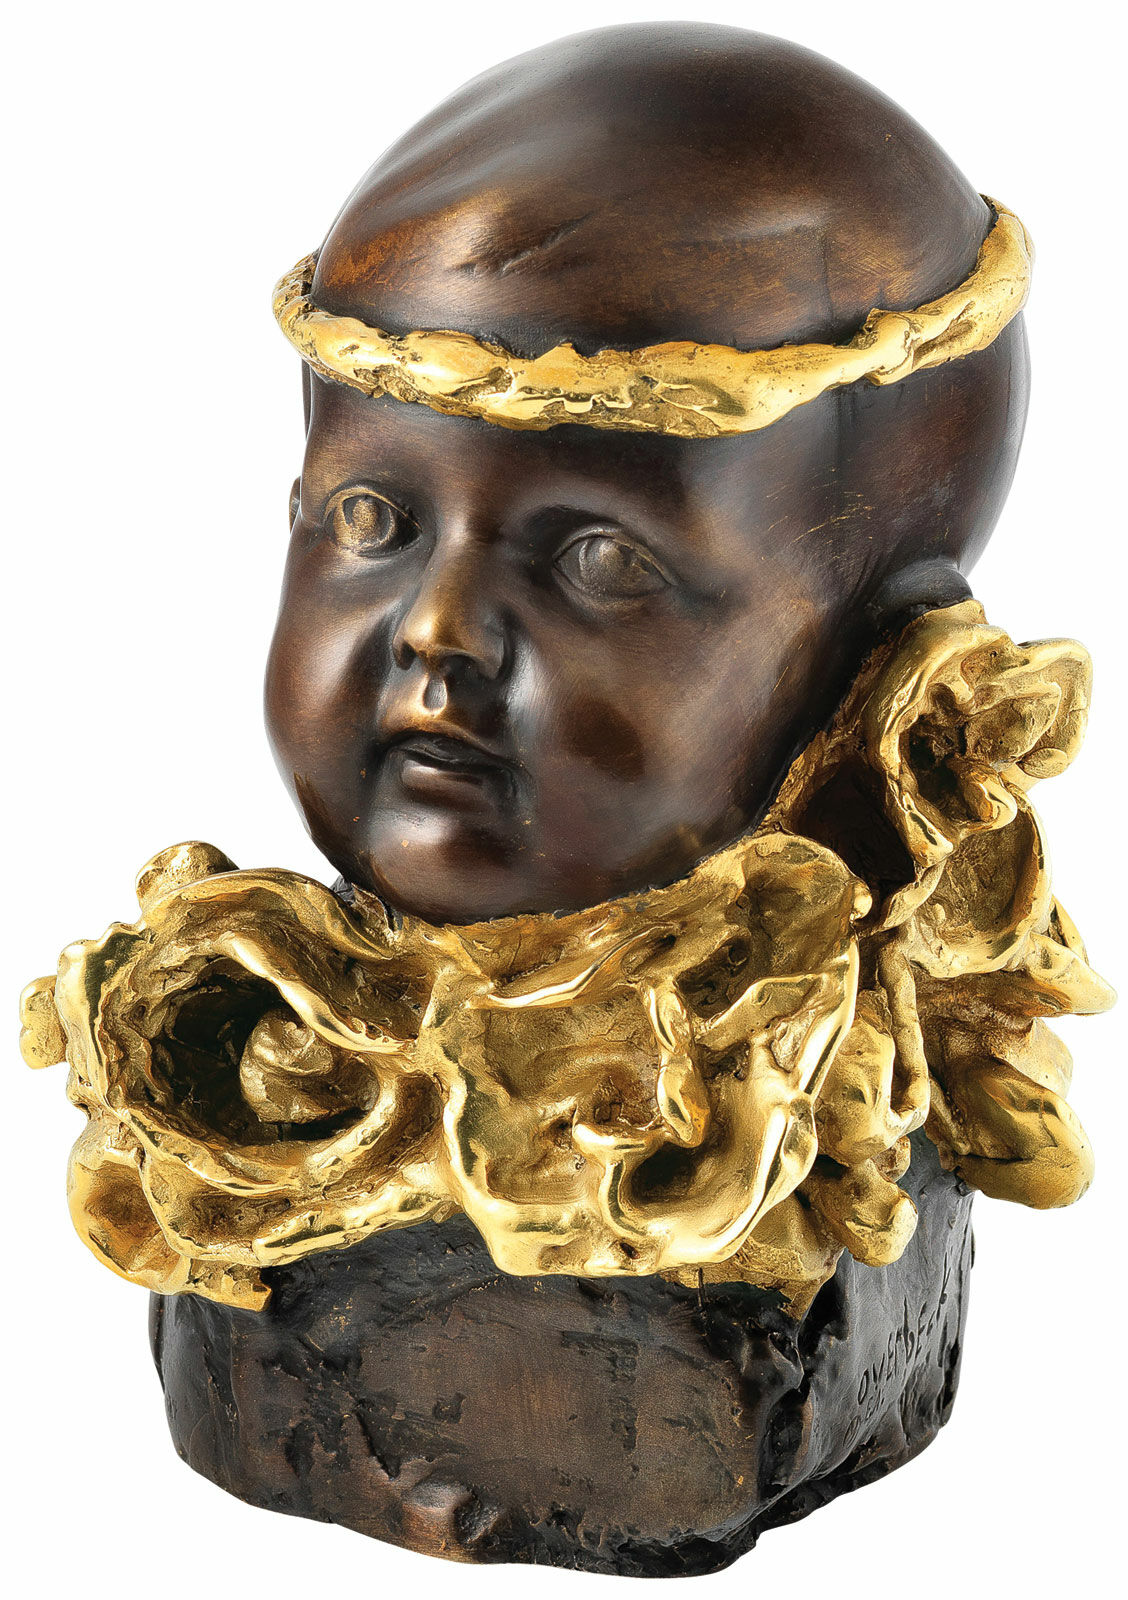 Sculpture "Boy with Golden Headband", bronze partially gold-plated by Cyrus Overbeck